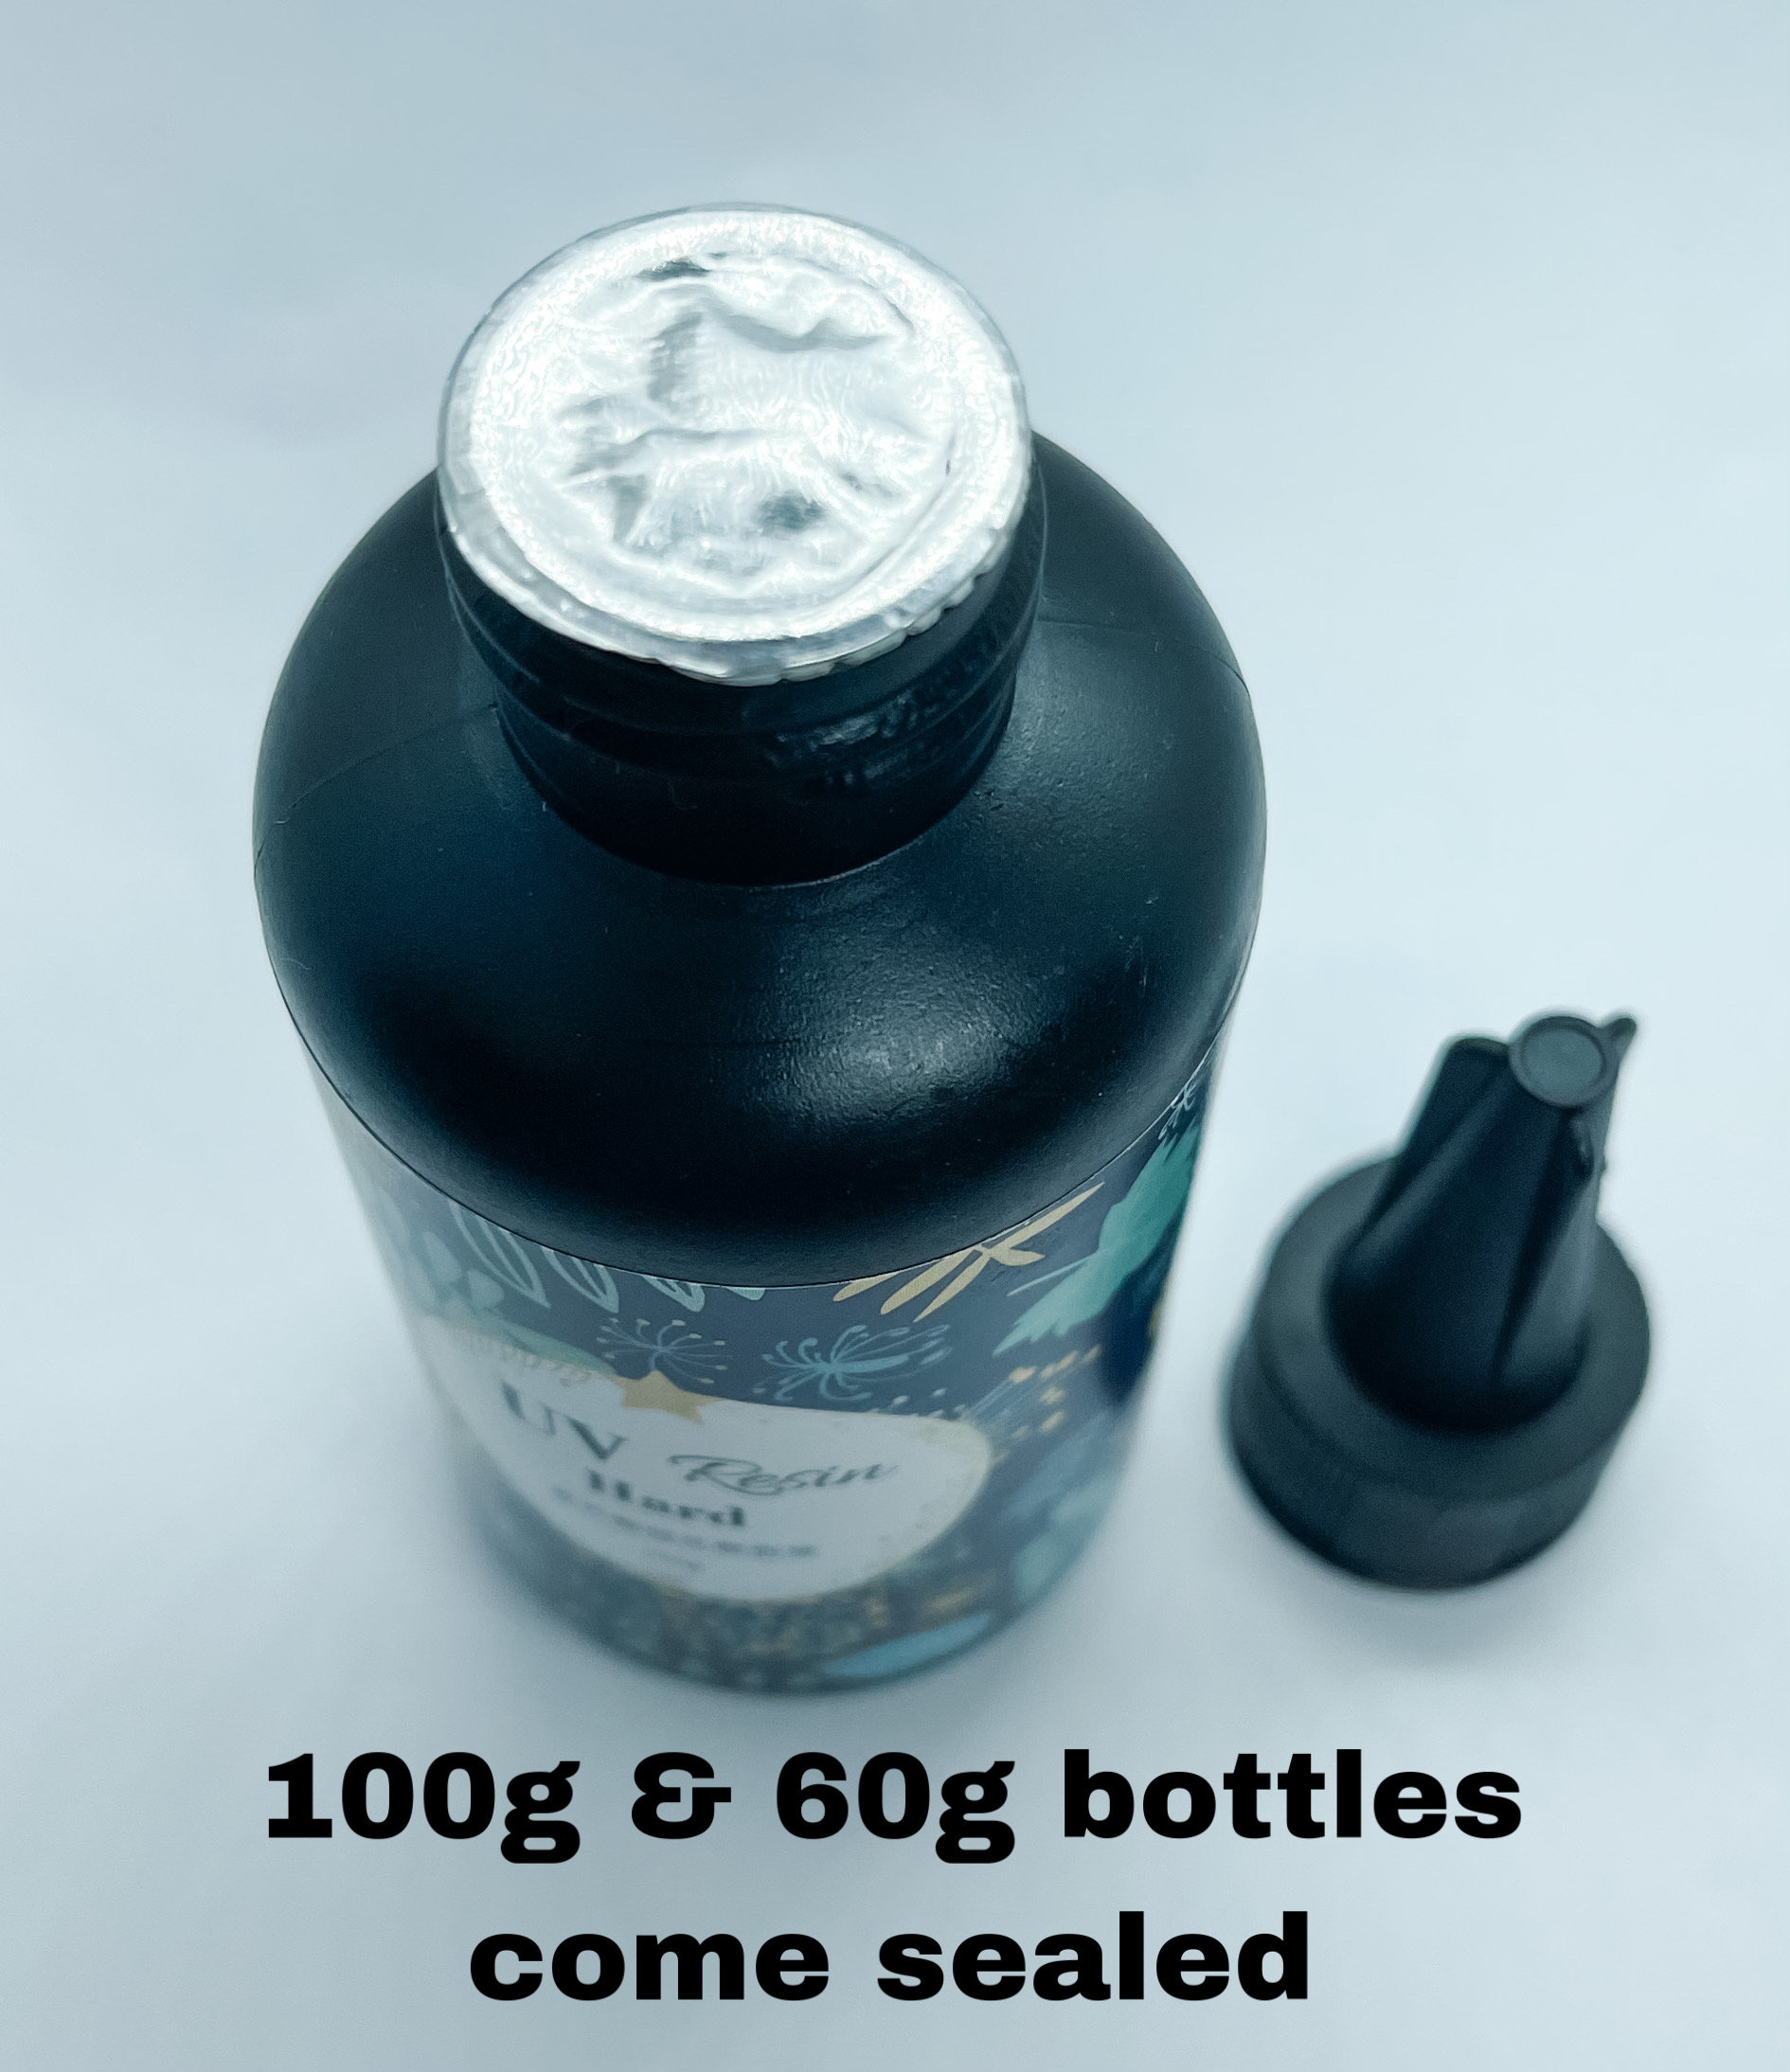 Ultradome UV Epoxy Resin for Jewelry and Polymer Clay 2oz Bottle